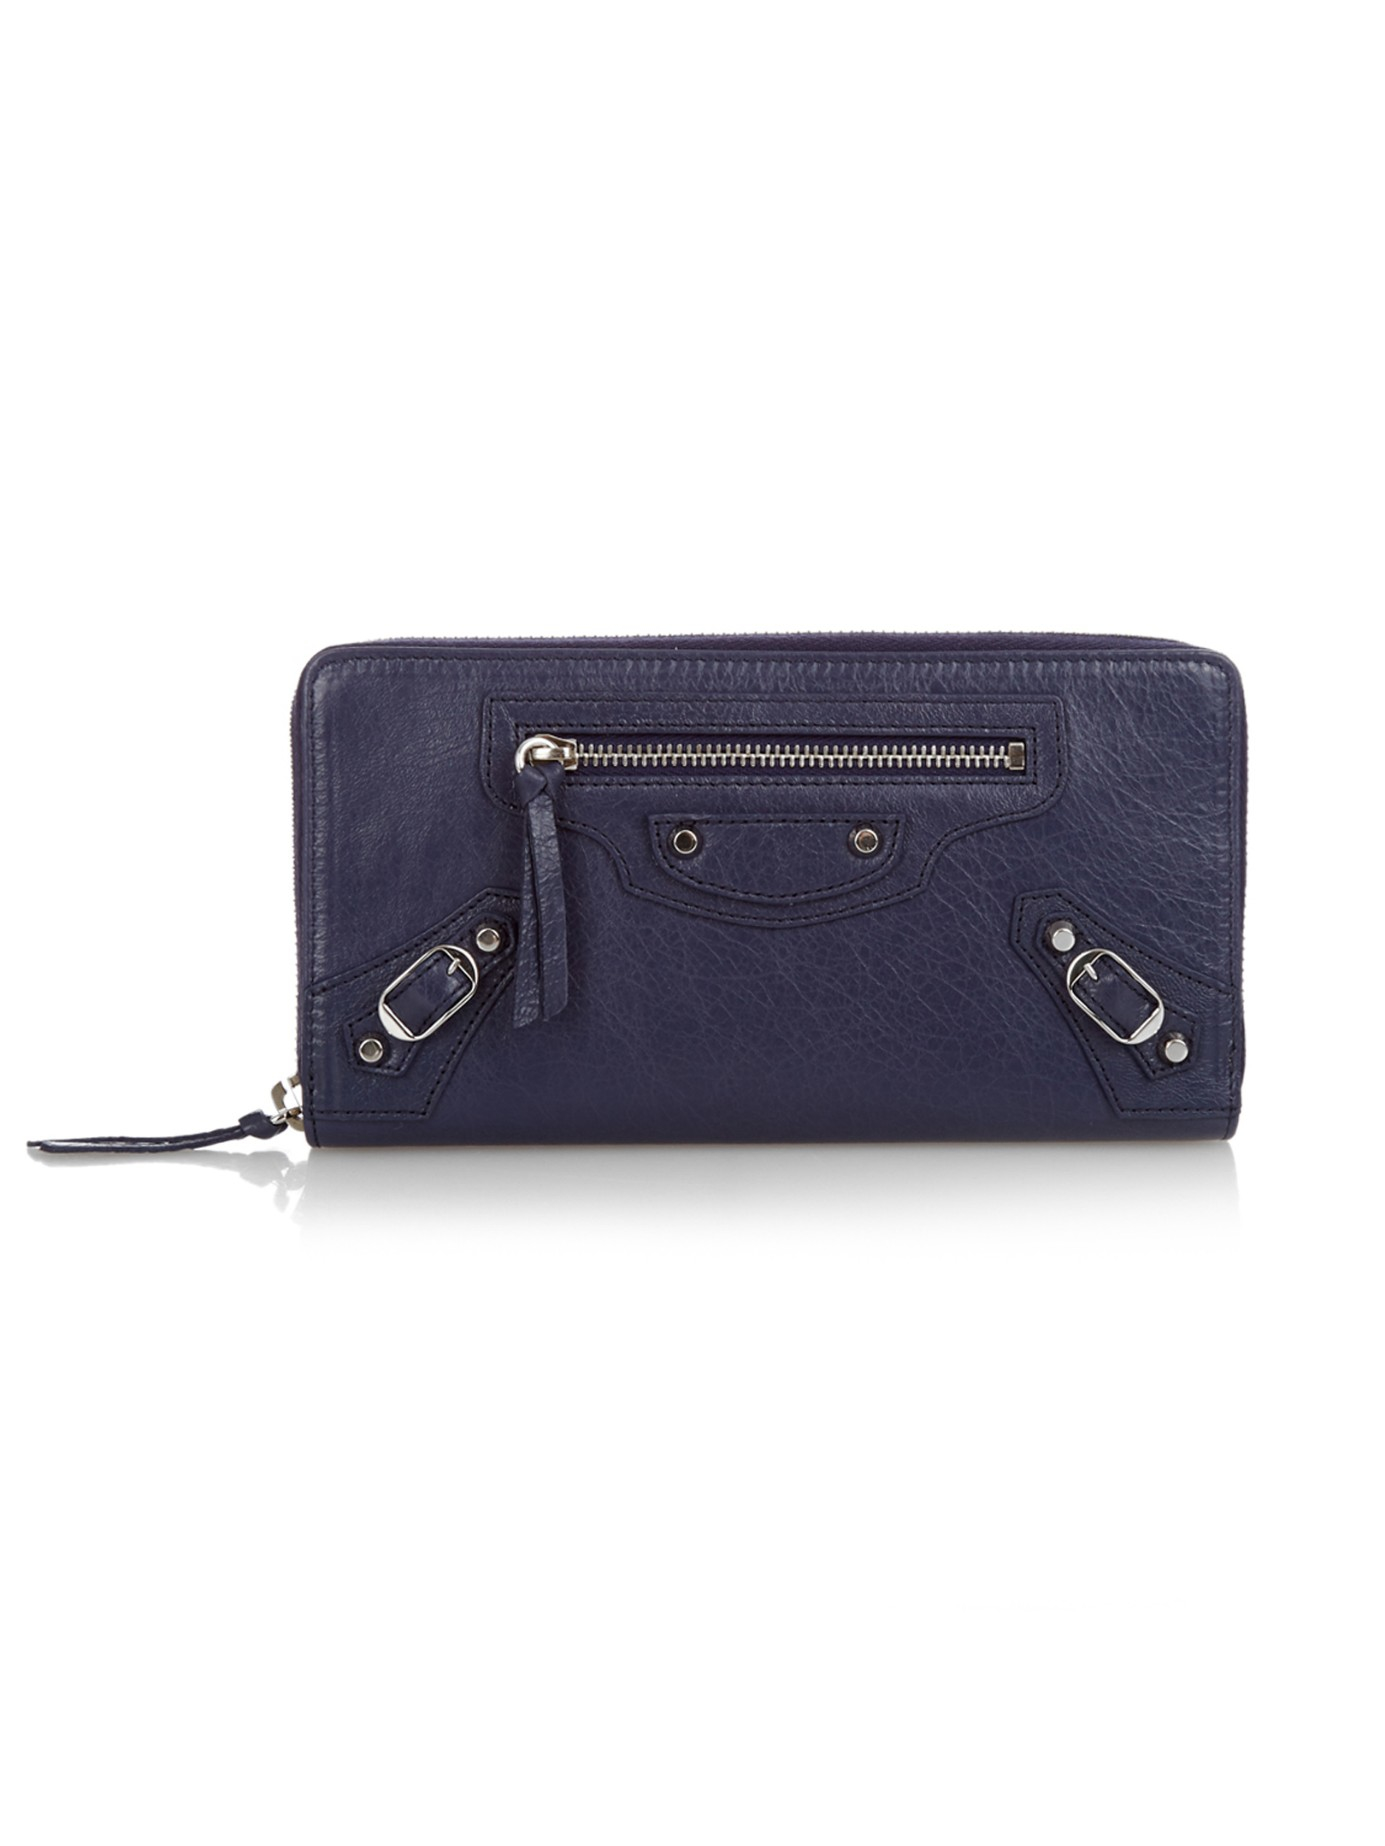 Balenciaga Classic Zip-around Leather Wallet in Navy (Blue) - Lyst